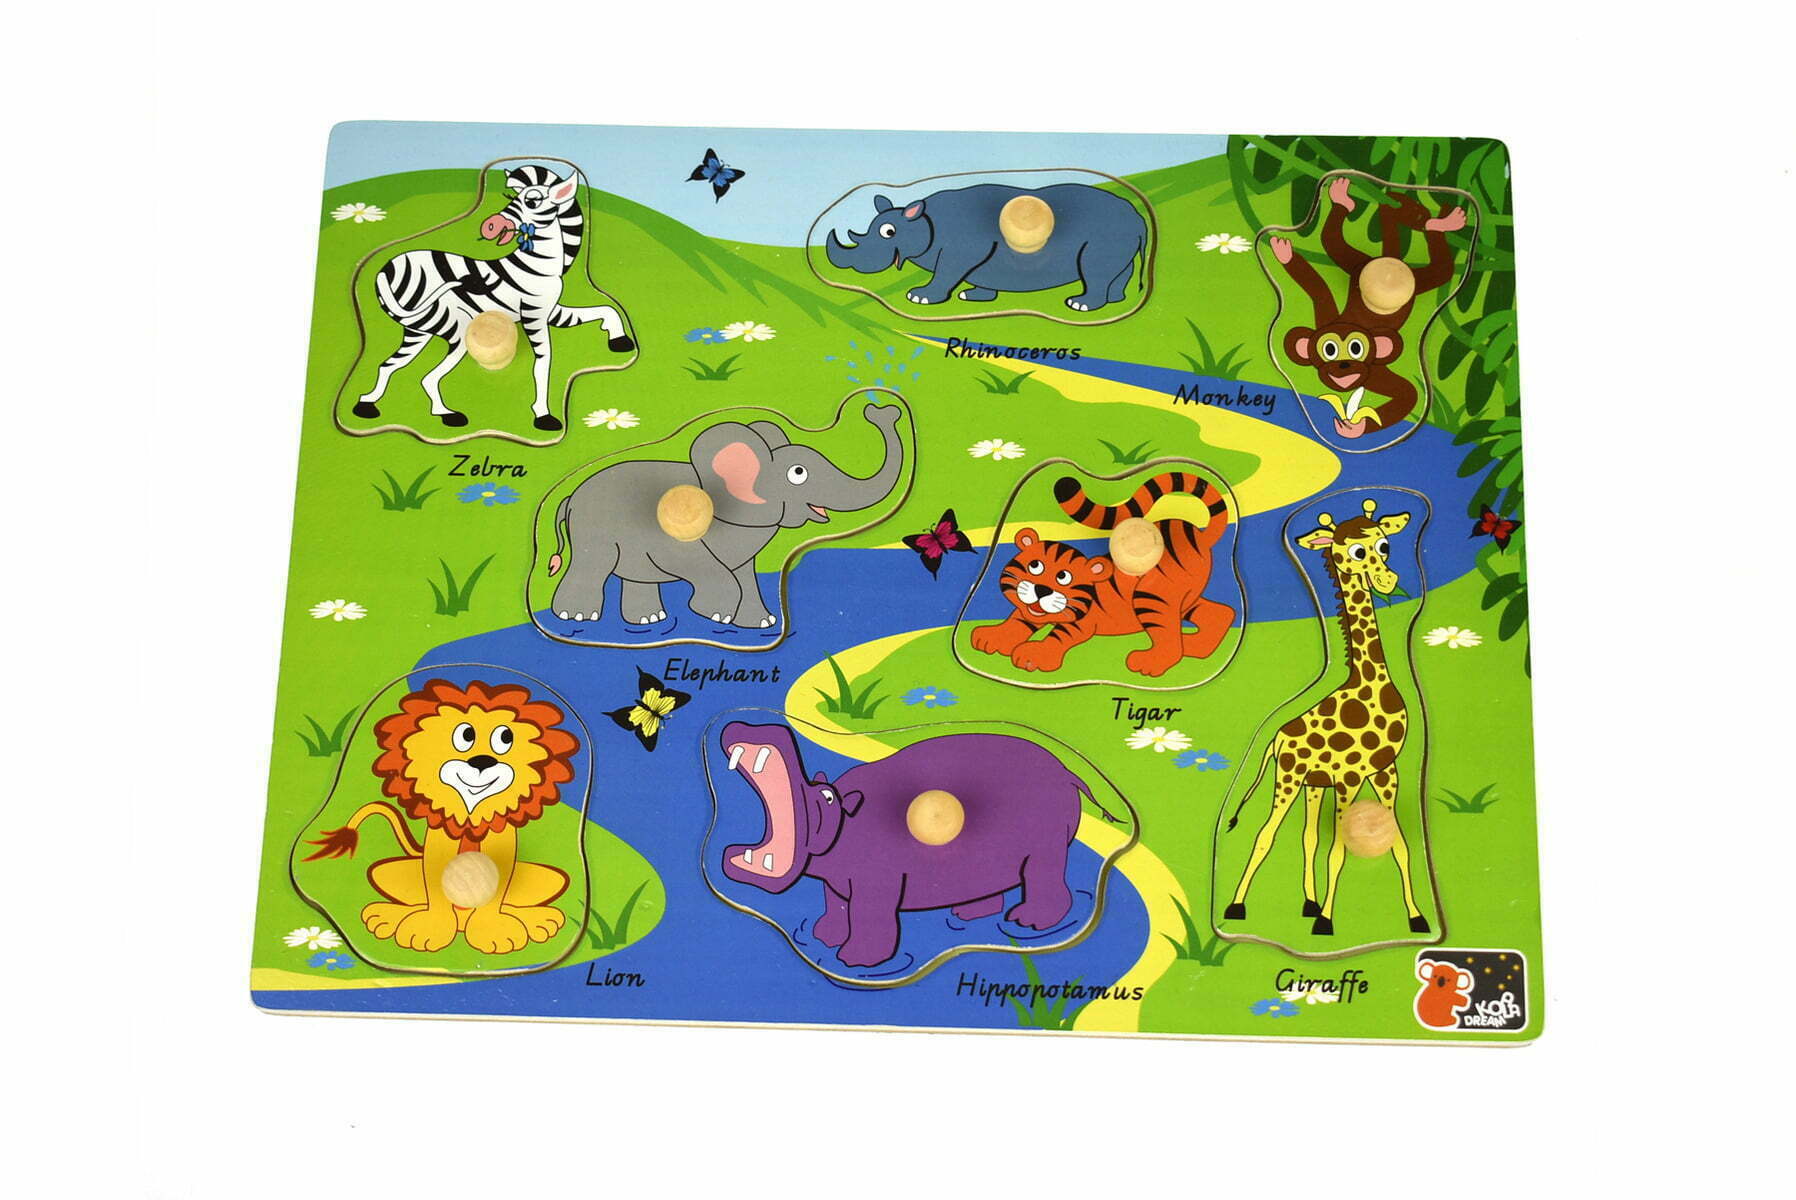 Koala Dream 2 In 1 Safari Animal Peg Puzzle | Nice Tribe Toys Online Store  Specialising in Fun Learning Educational Toys